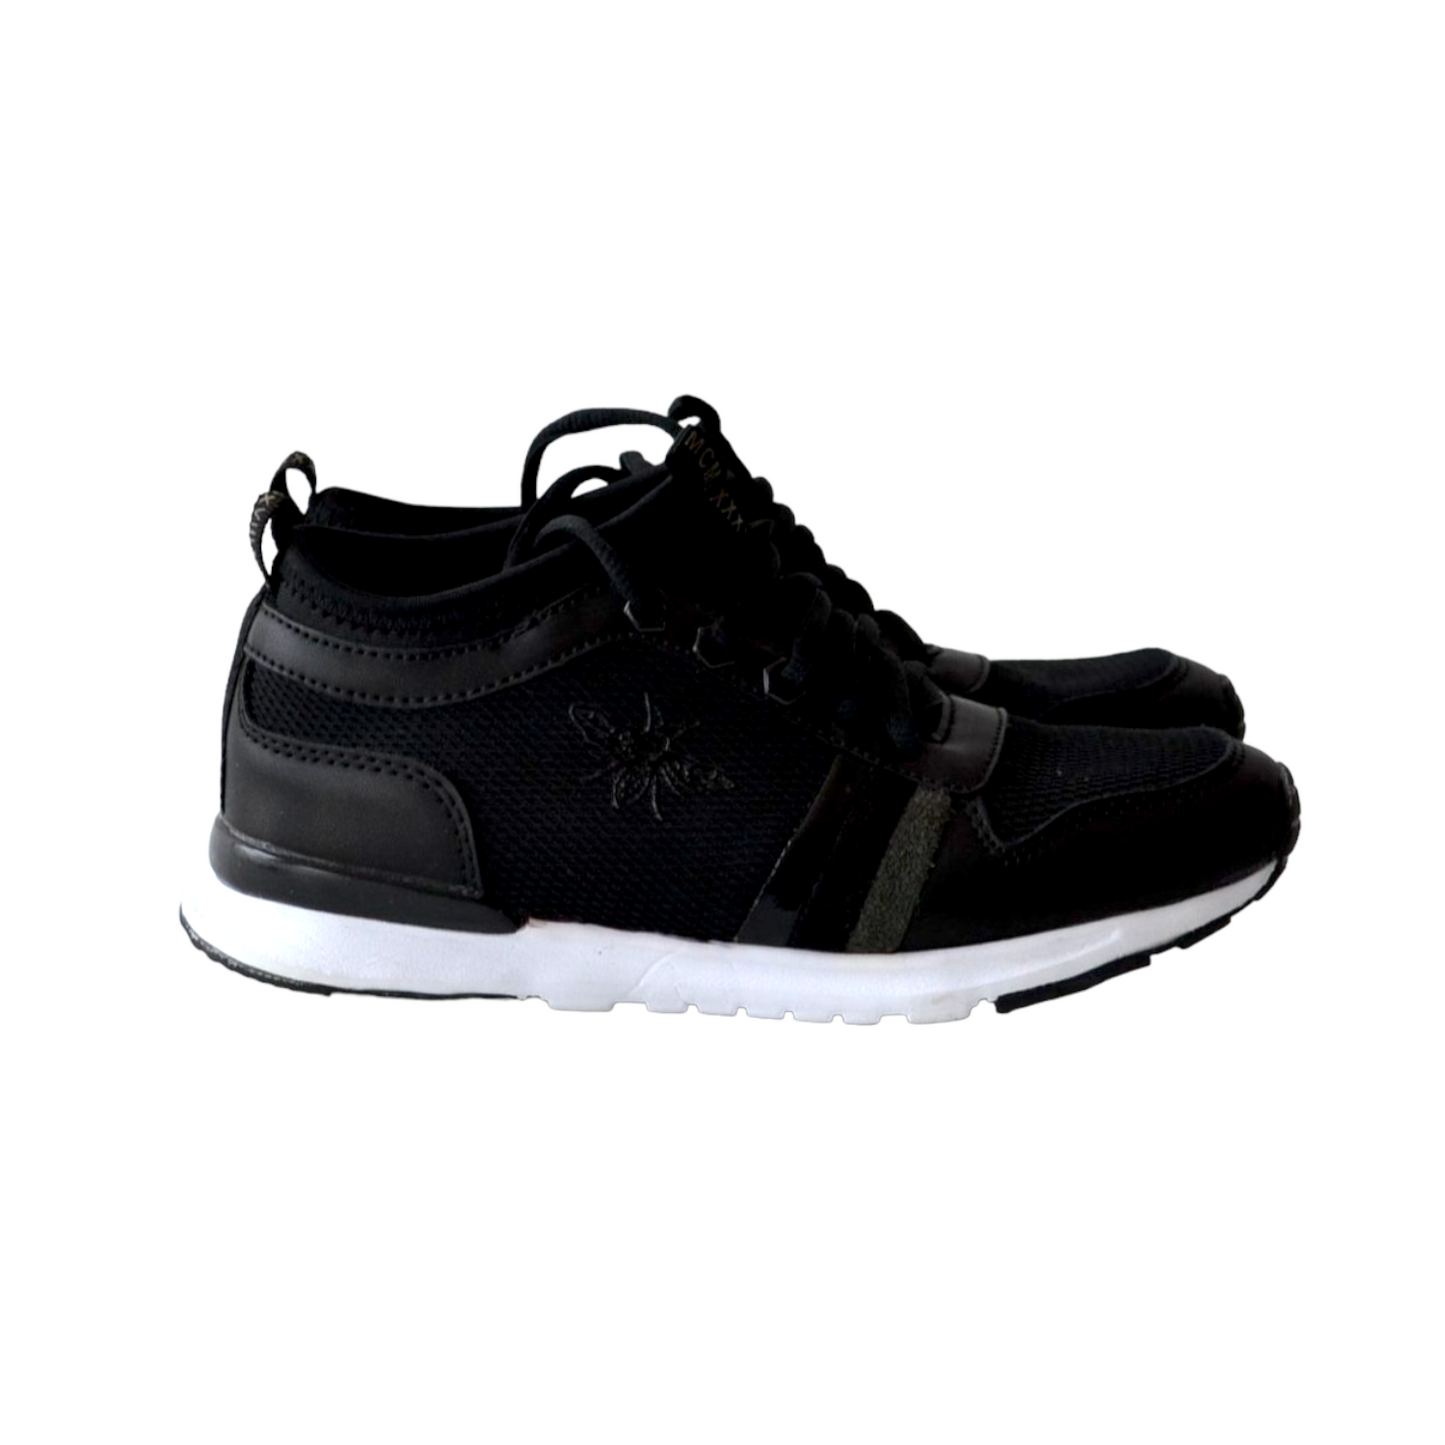 Black Trainers with Bee Detail Shoe Size 2